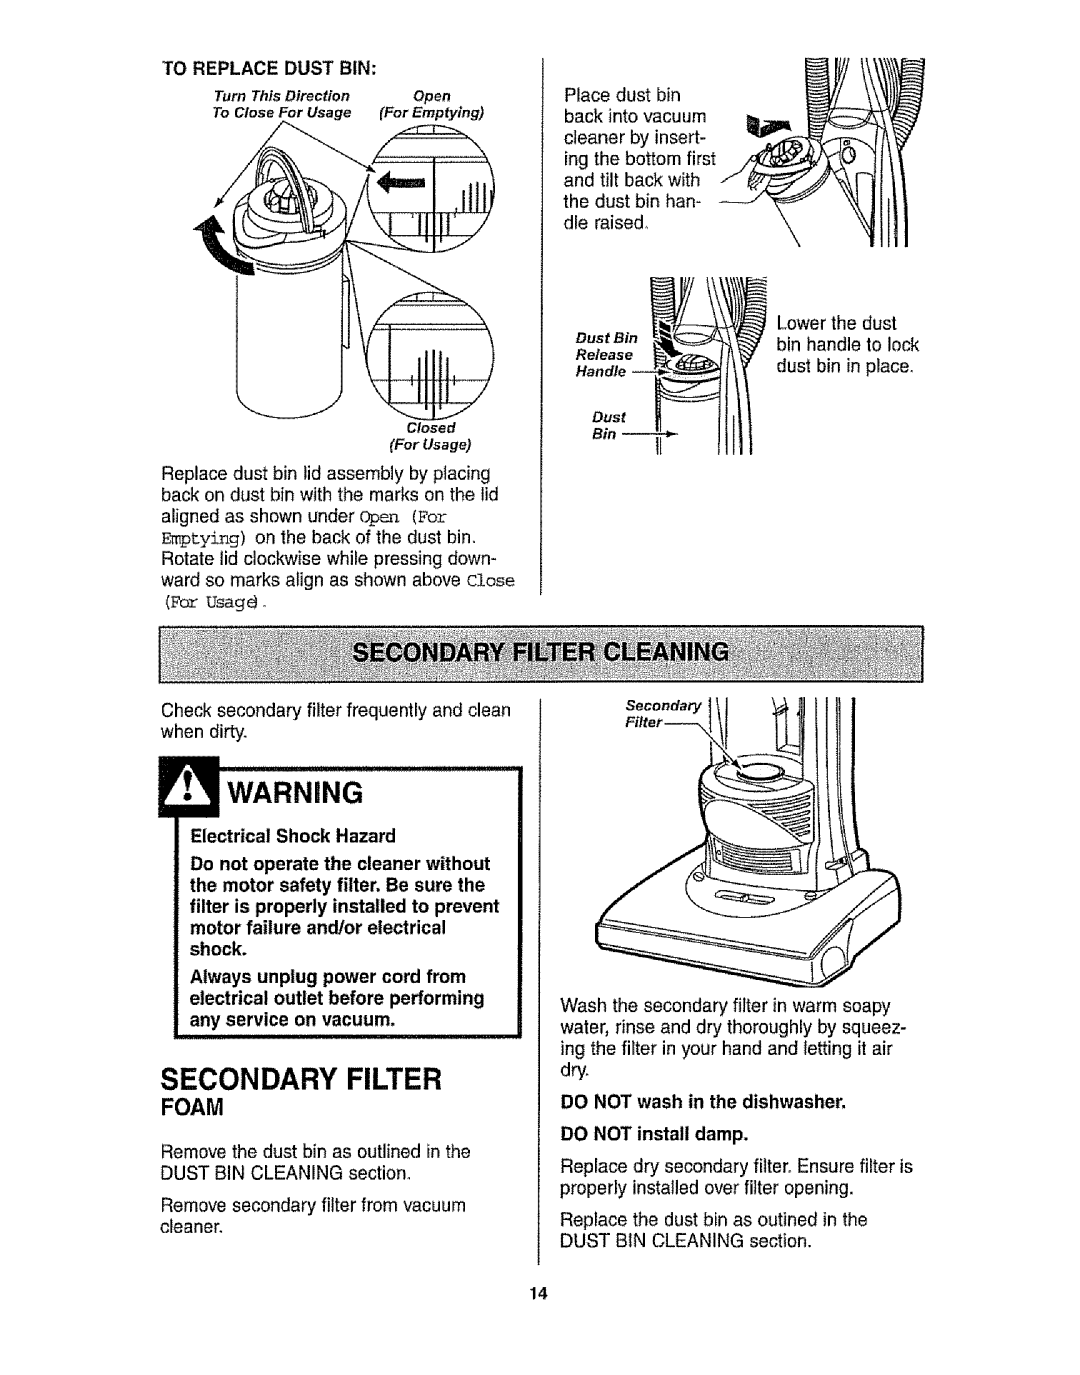 Kenmore 116.31721 owner manual Secondary Filter, Foam, To Replace Dust Bin, Electrical Shock Hazard 